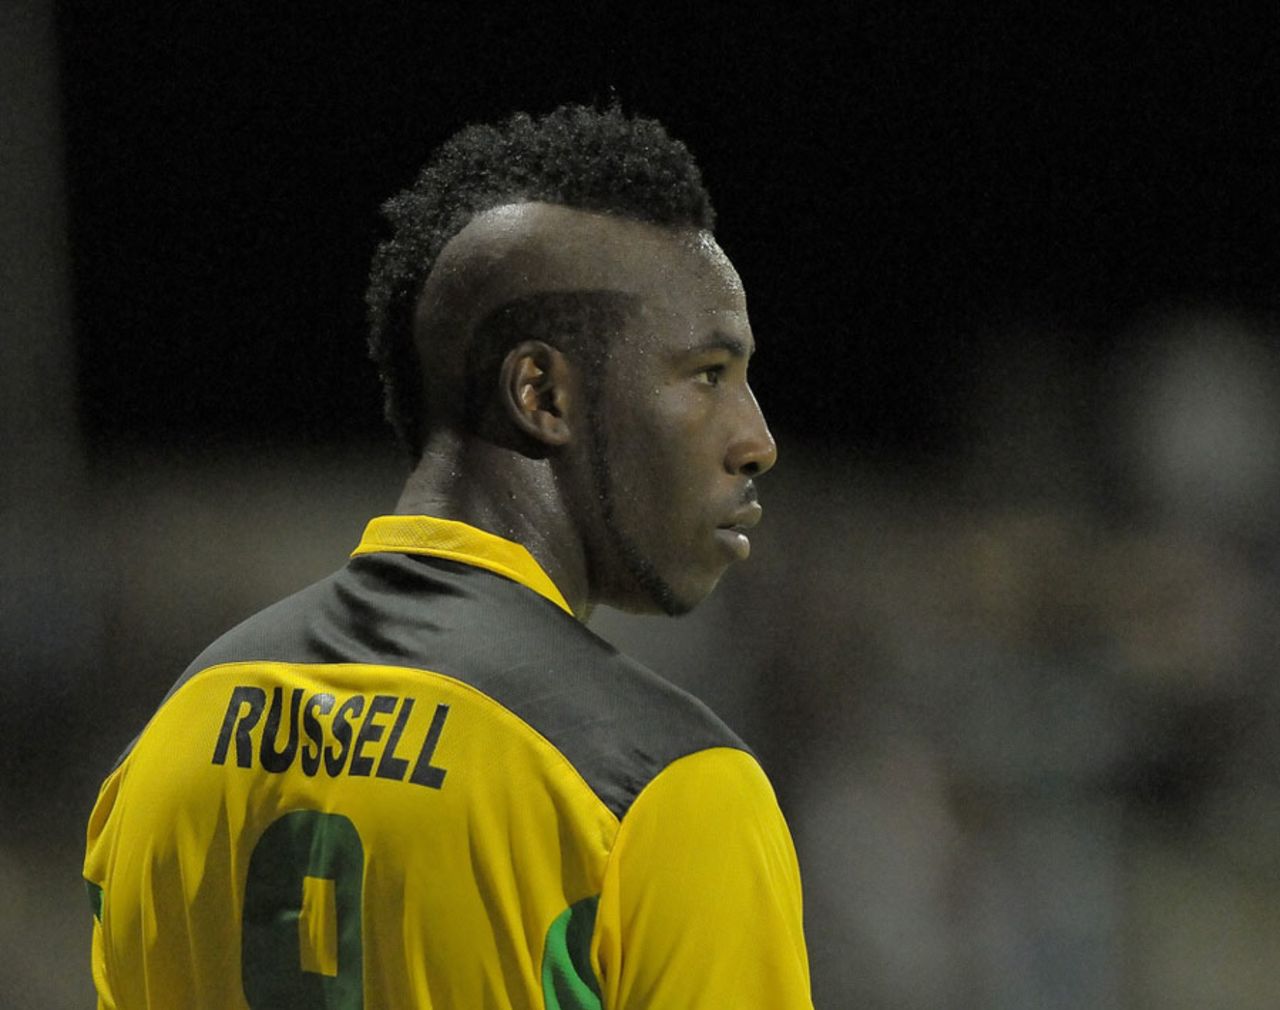 Andre Russell takes the field for Jamaica in the Caribbean T20, Combined Campuses and Colleges v Jamaica, Caribbean T20 2011-12, Group B match, North Sound, Antigua, January 10, 2012